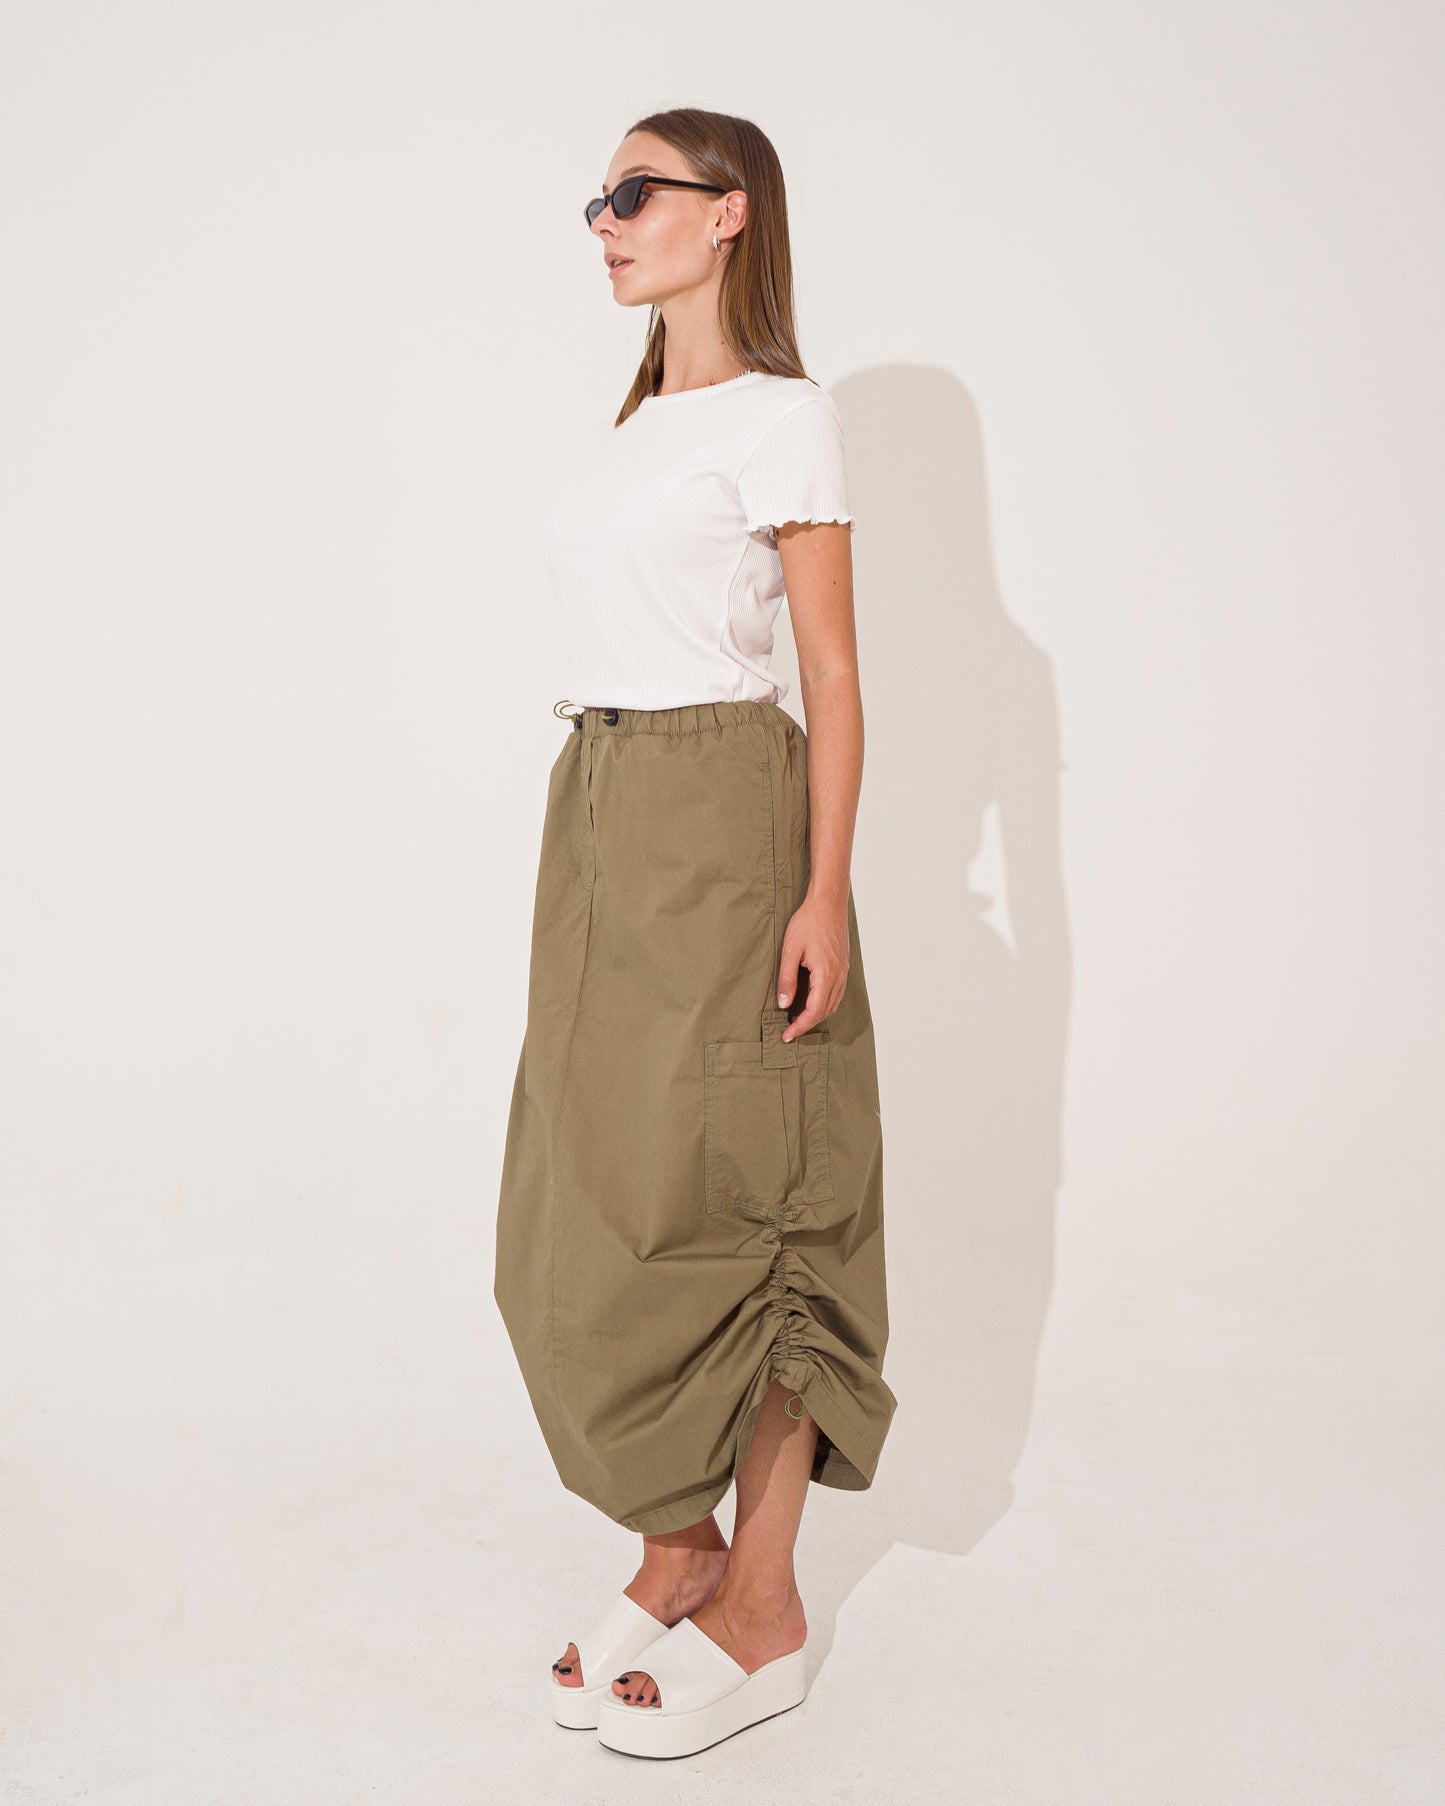 MIDI LENGHT GAGARDINE SKIRT WITH SIDE STRAP